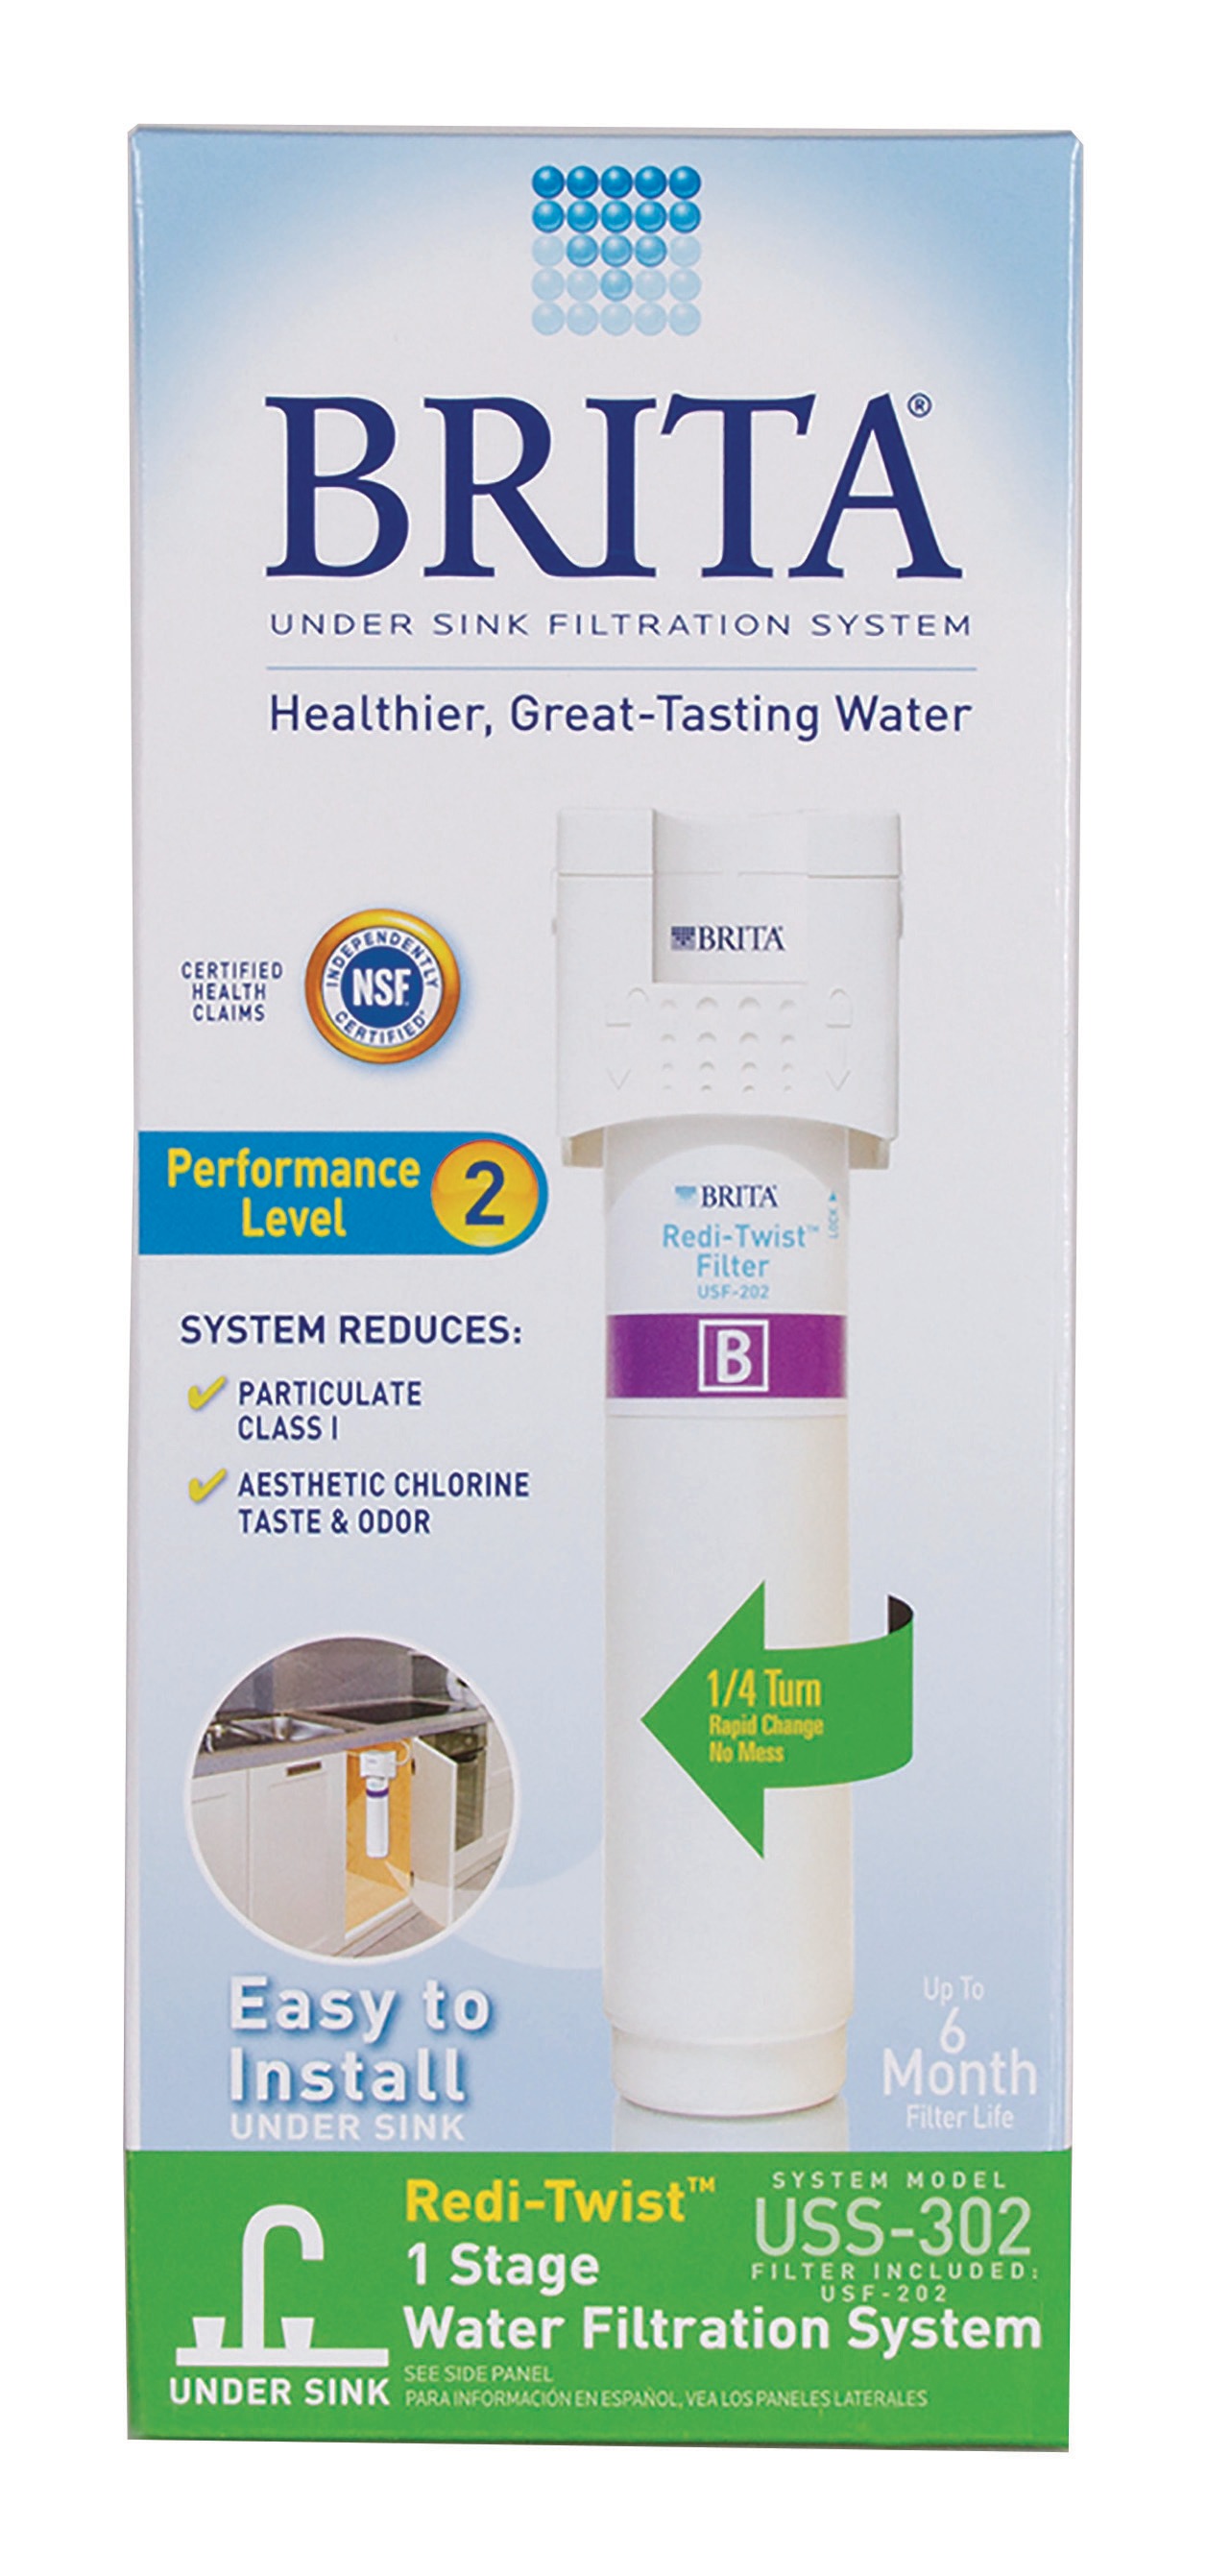 Redi-Twist 1-Stage Drinking Water Filtration System - WFUSS302 - image 1 of 3